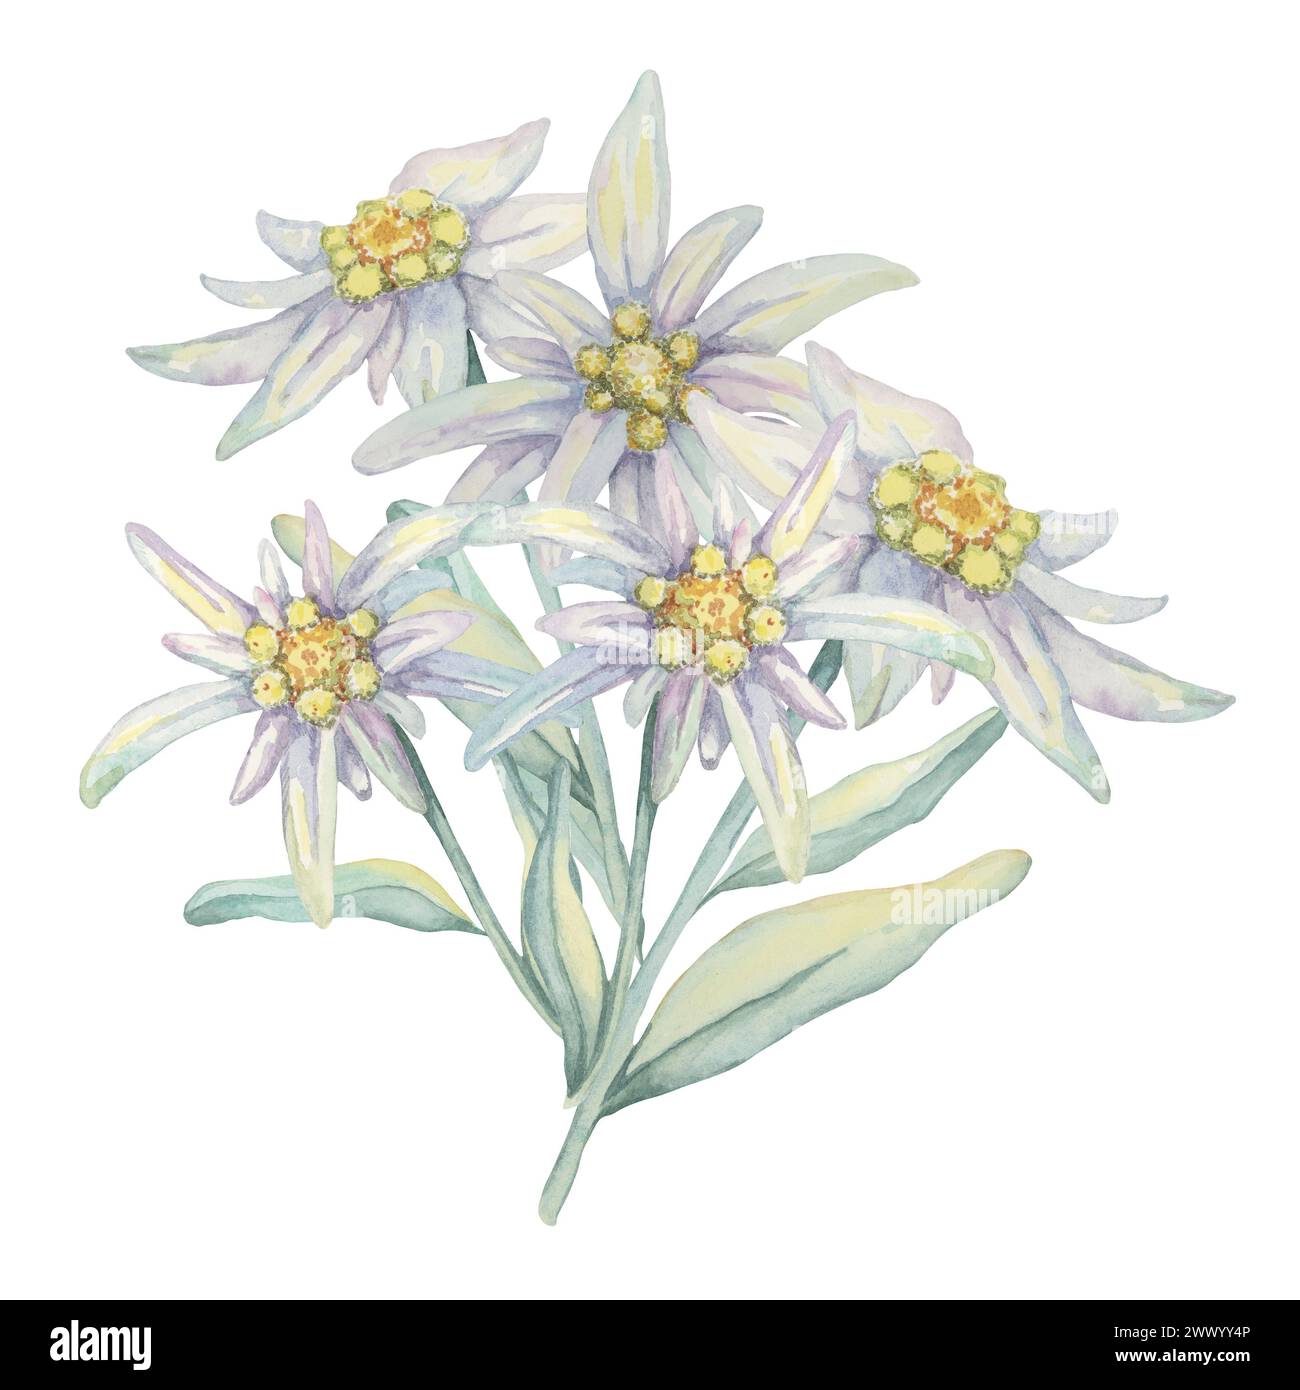 Edelweiss bouquet clipart. Watercolor illustration with white flowers and leaves. Leontopodium nivale hand drawn artwork isolated on white background. Design for printing, cards, apparel, stickers. Stock Photo